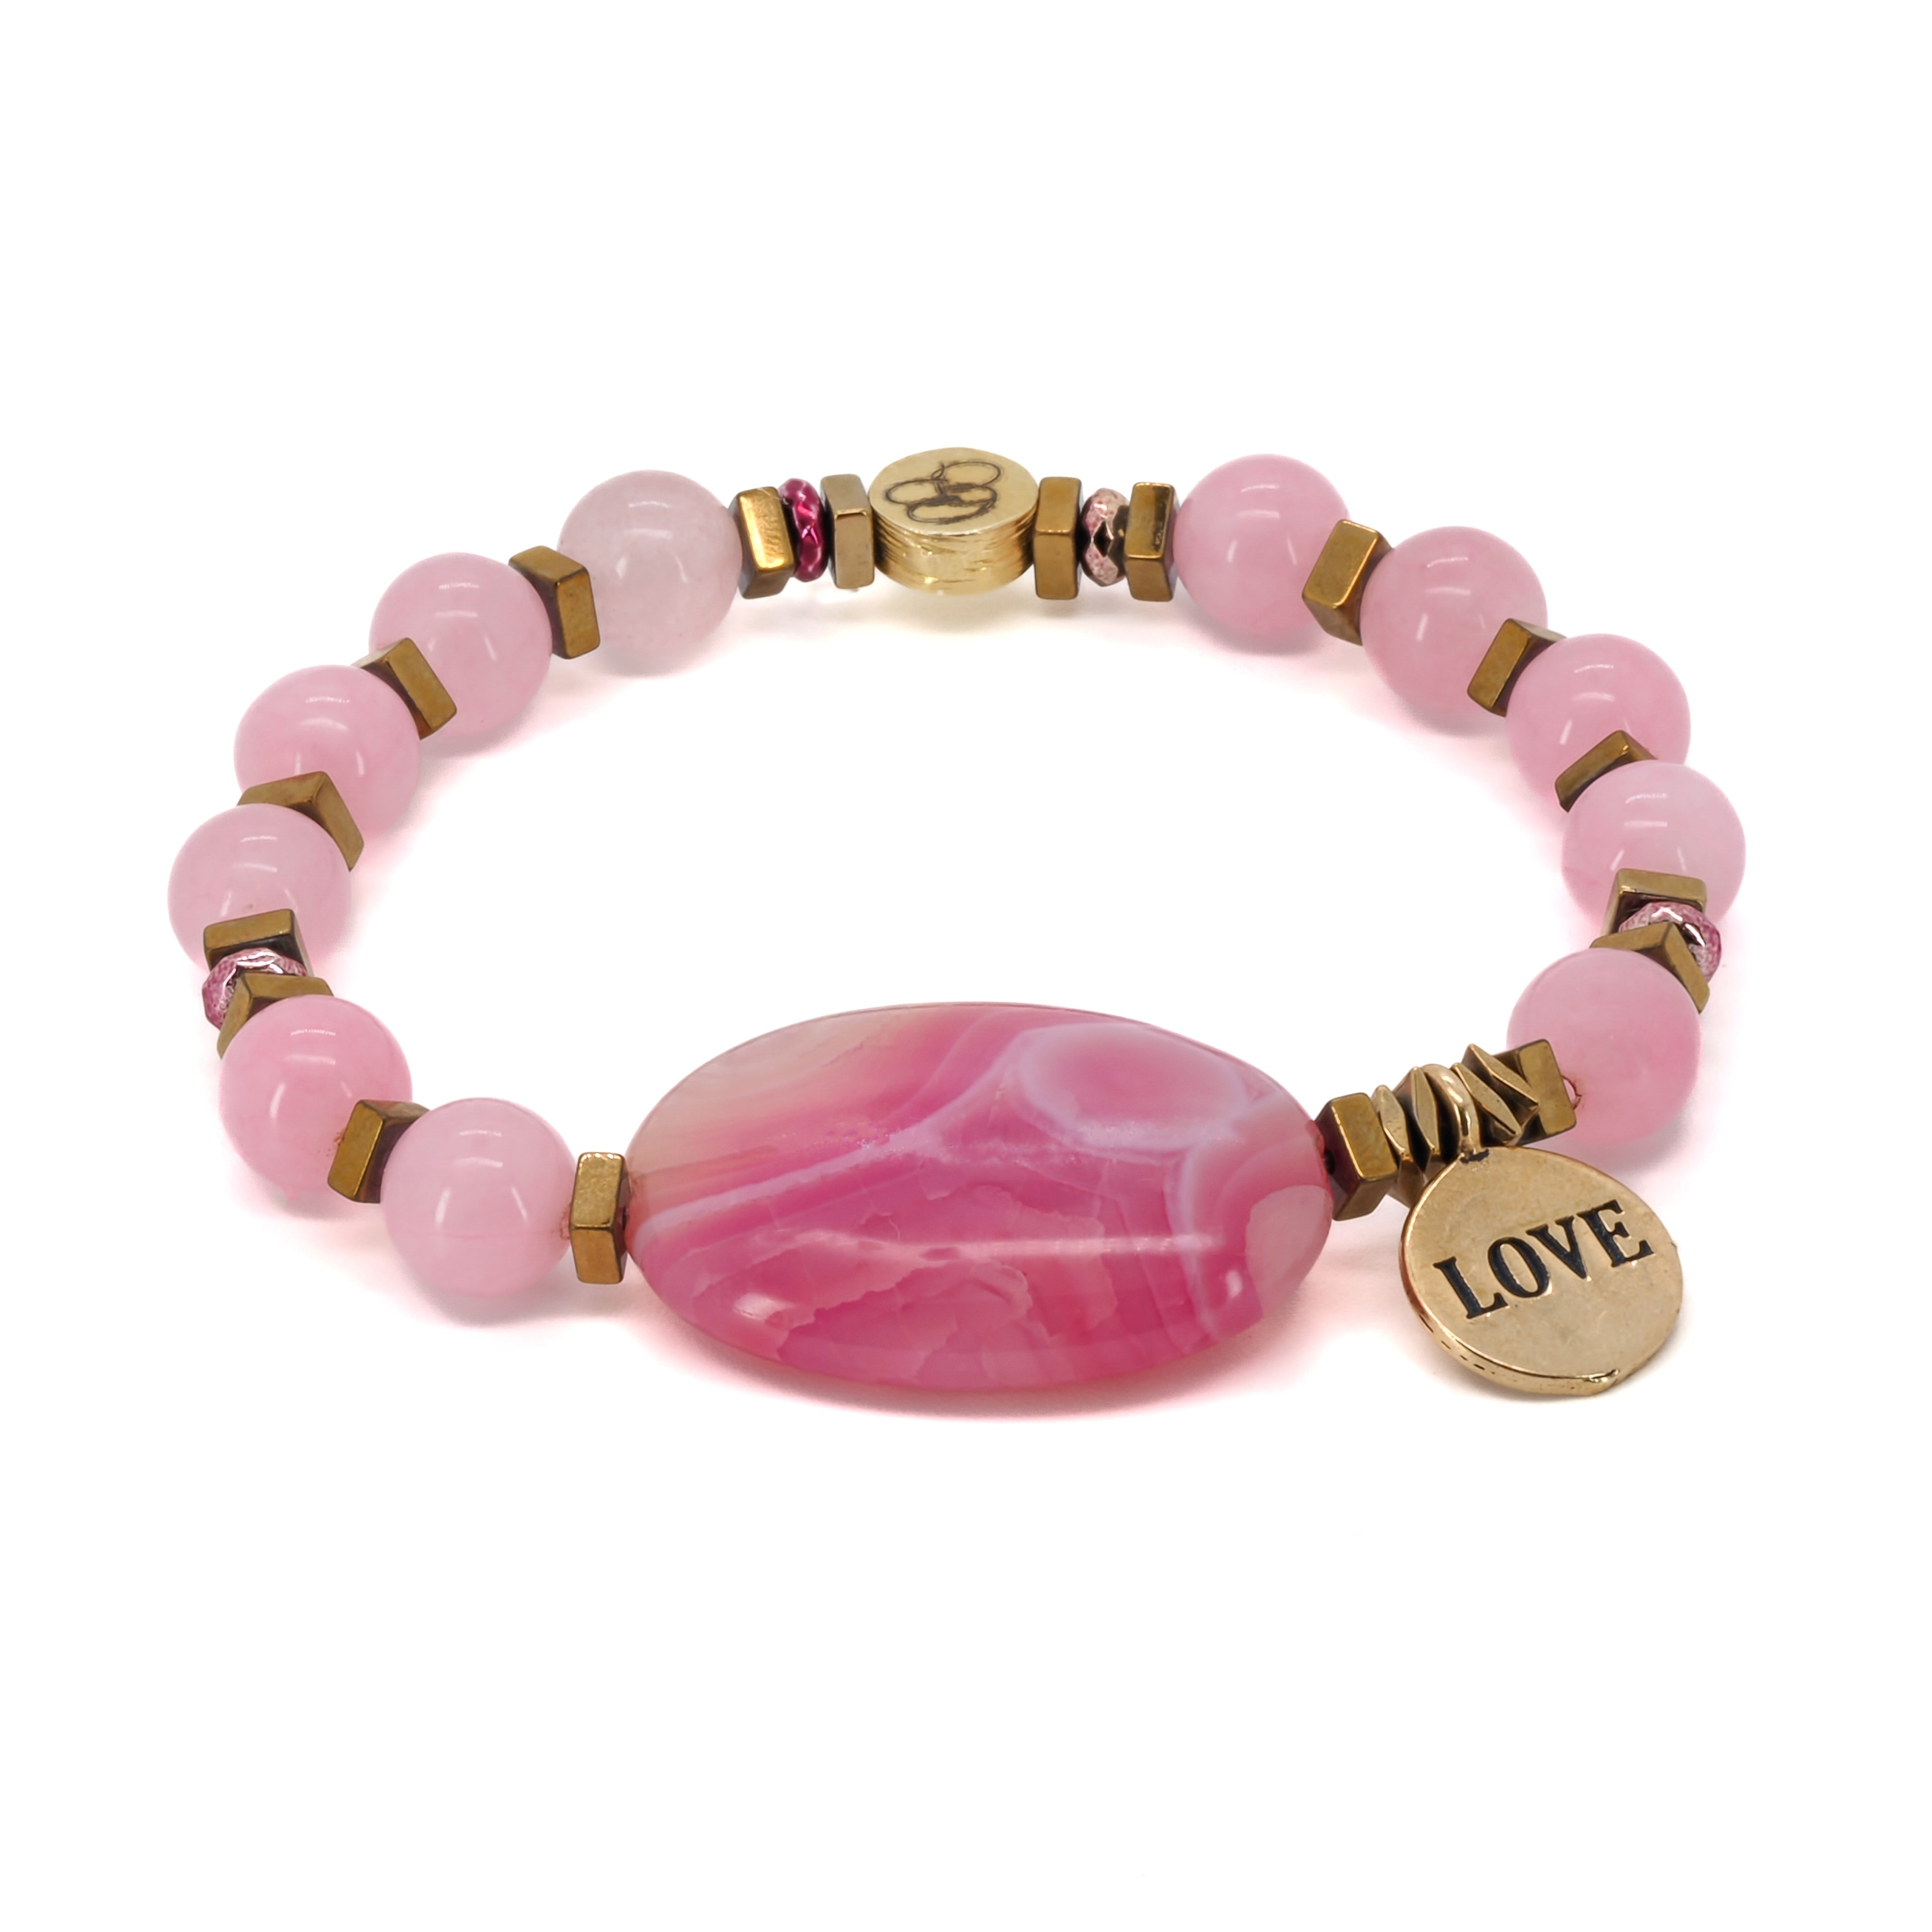 Add a touch of romance to your style with the Pink Agate Love Bracelet, featuring pink agate stones and a delicate bronze love charm.